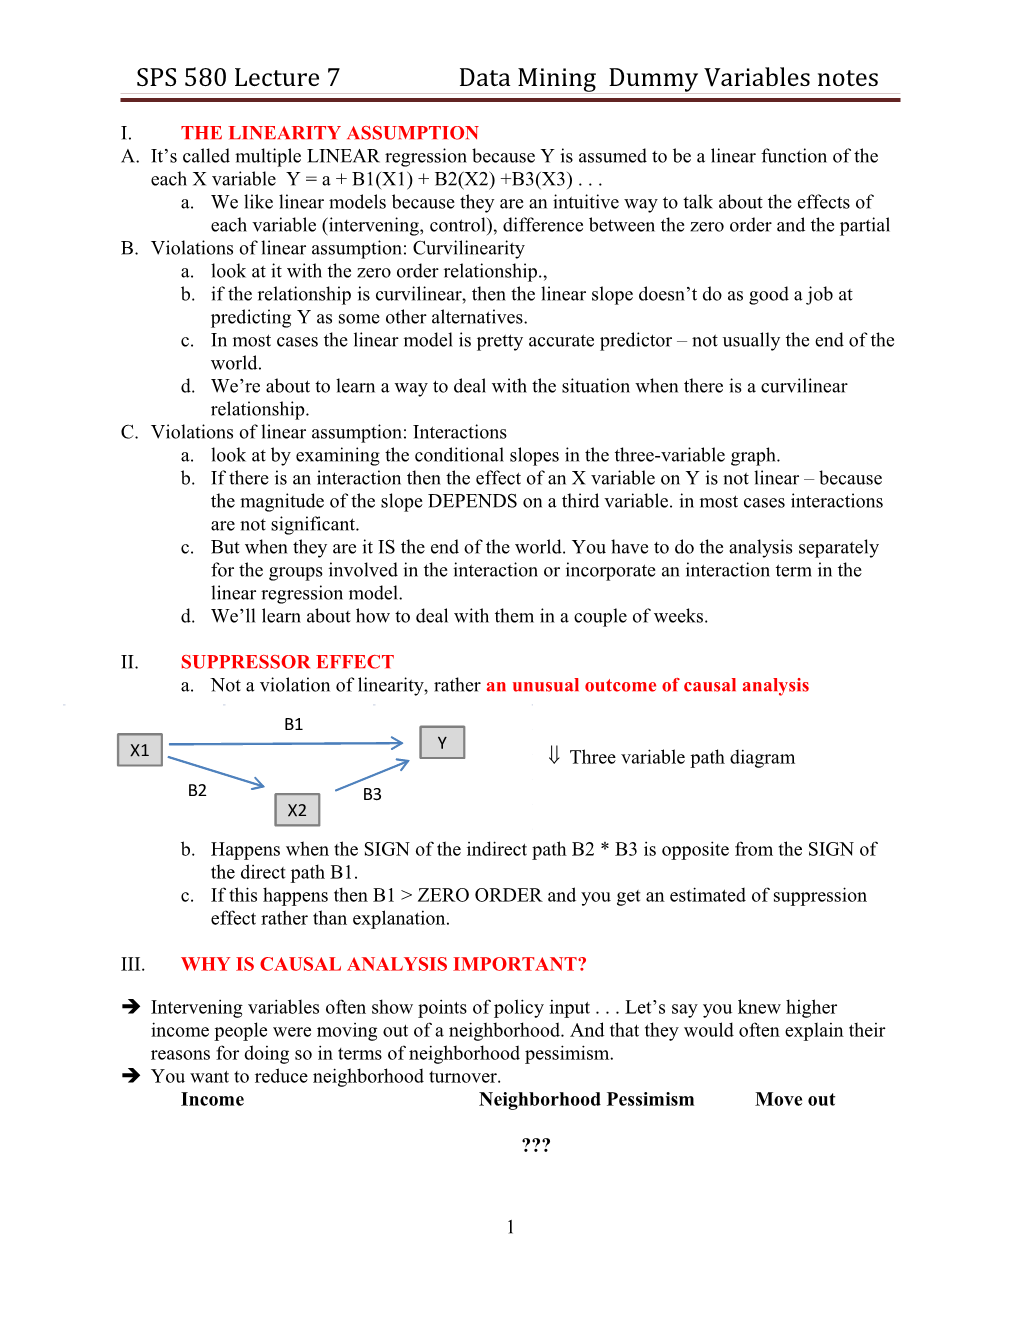 SPS 580 Lecture 7 Data Mining Dummy Variables Notes